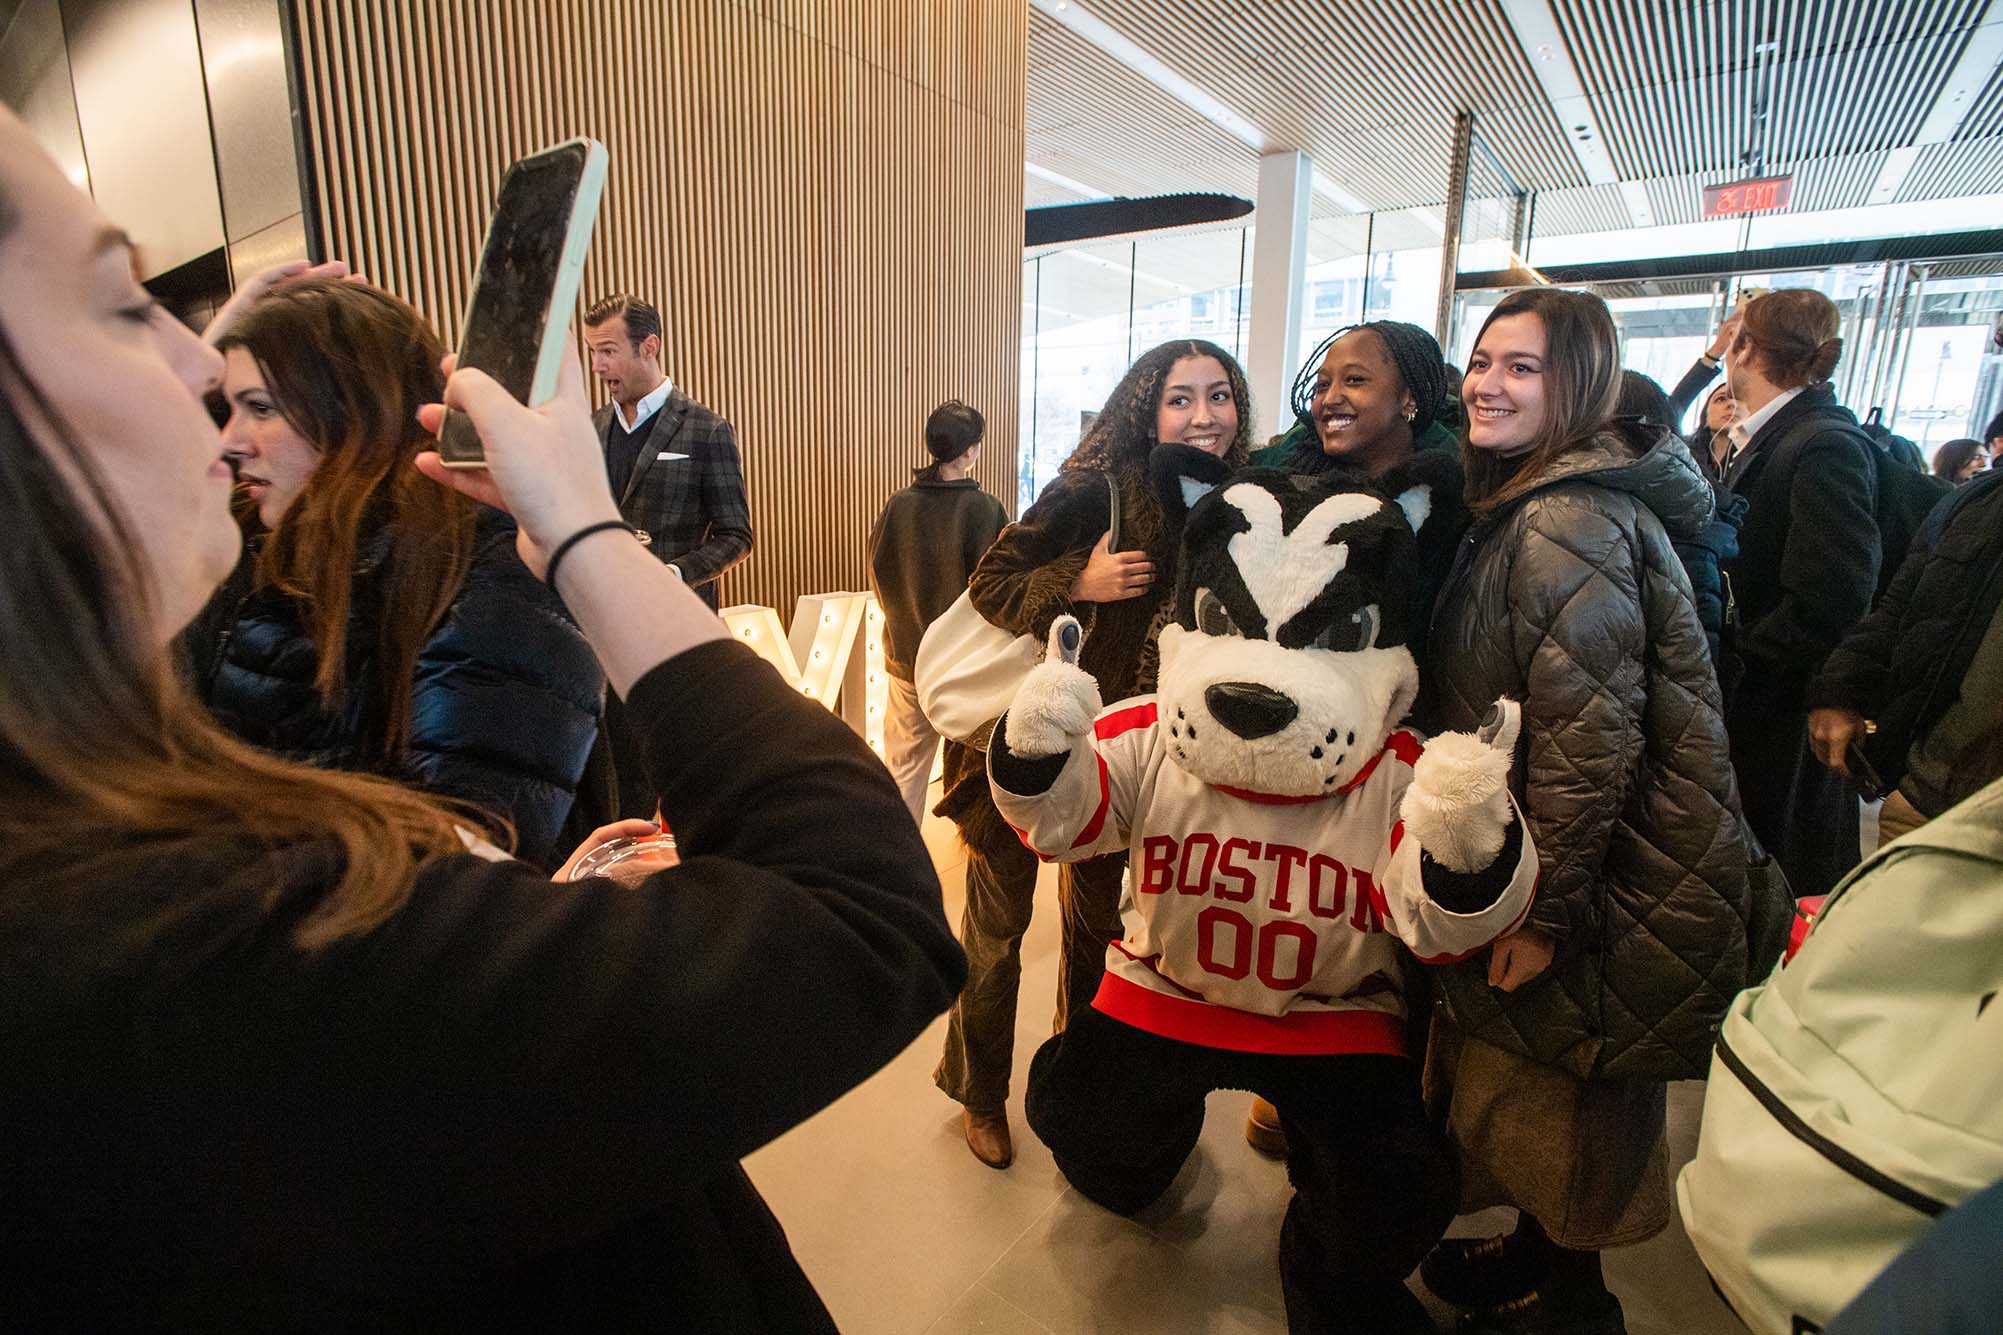 Photo: Students pose with Rhett in the lobby of the Center for Computing & Data Sciences on the first day of classes January 19. Three students stand behind a Boston Terrier mascot wearing a BU Hockey jersey as a woman snaps a photo of them on her phone.